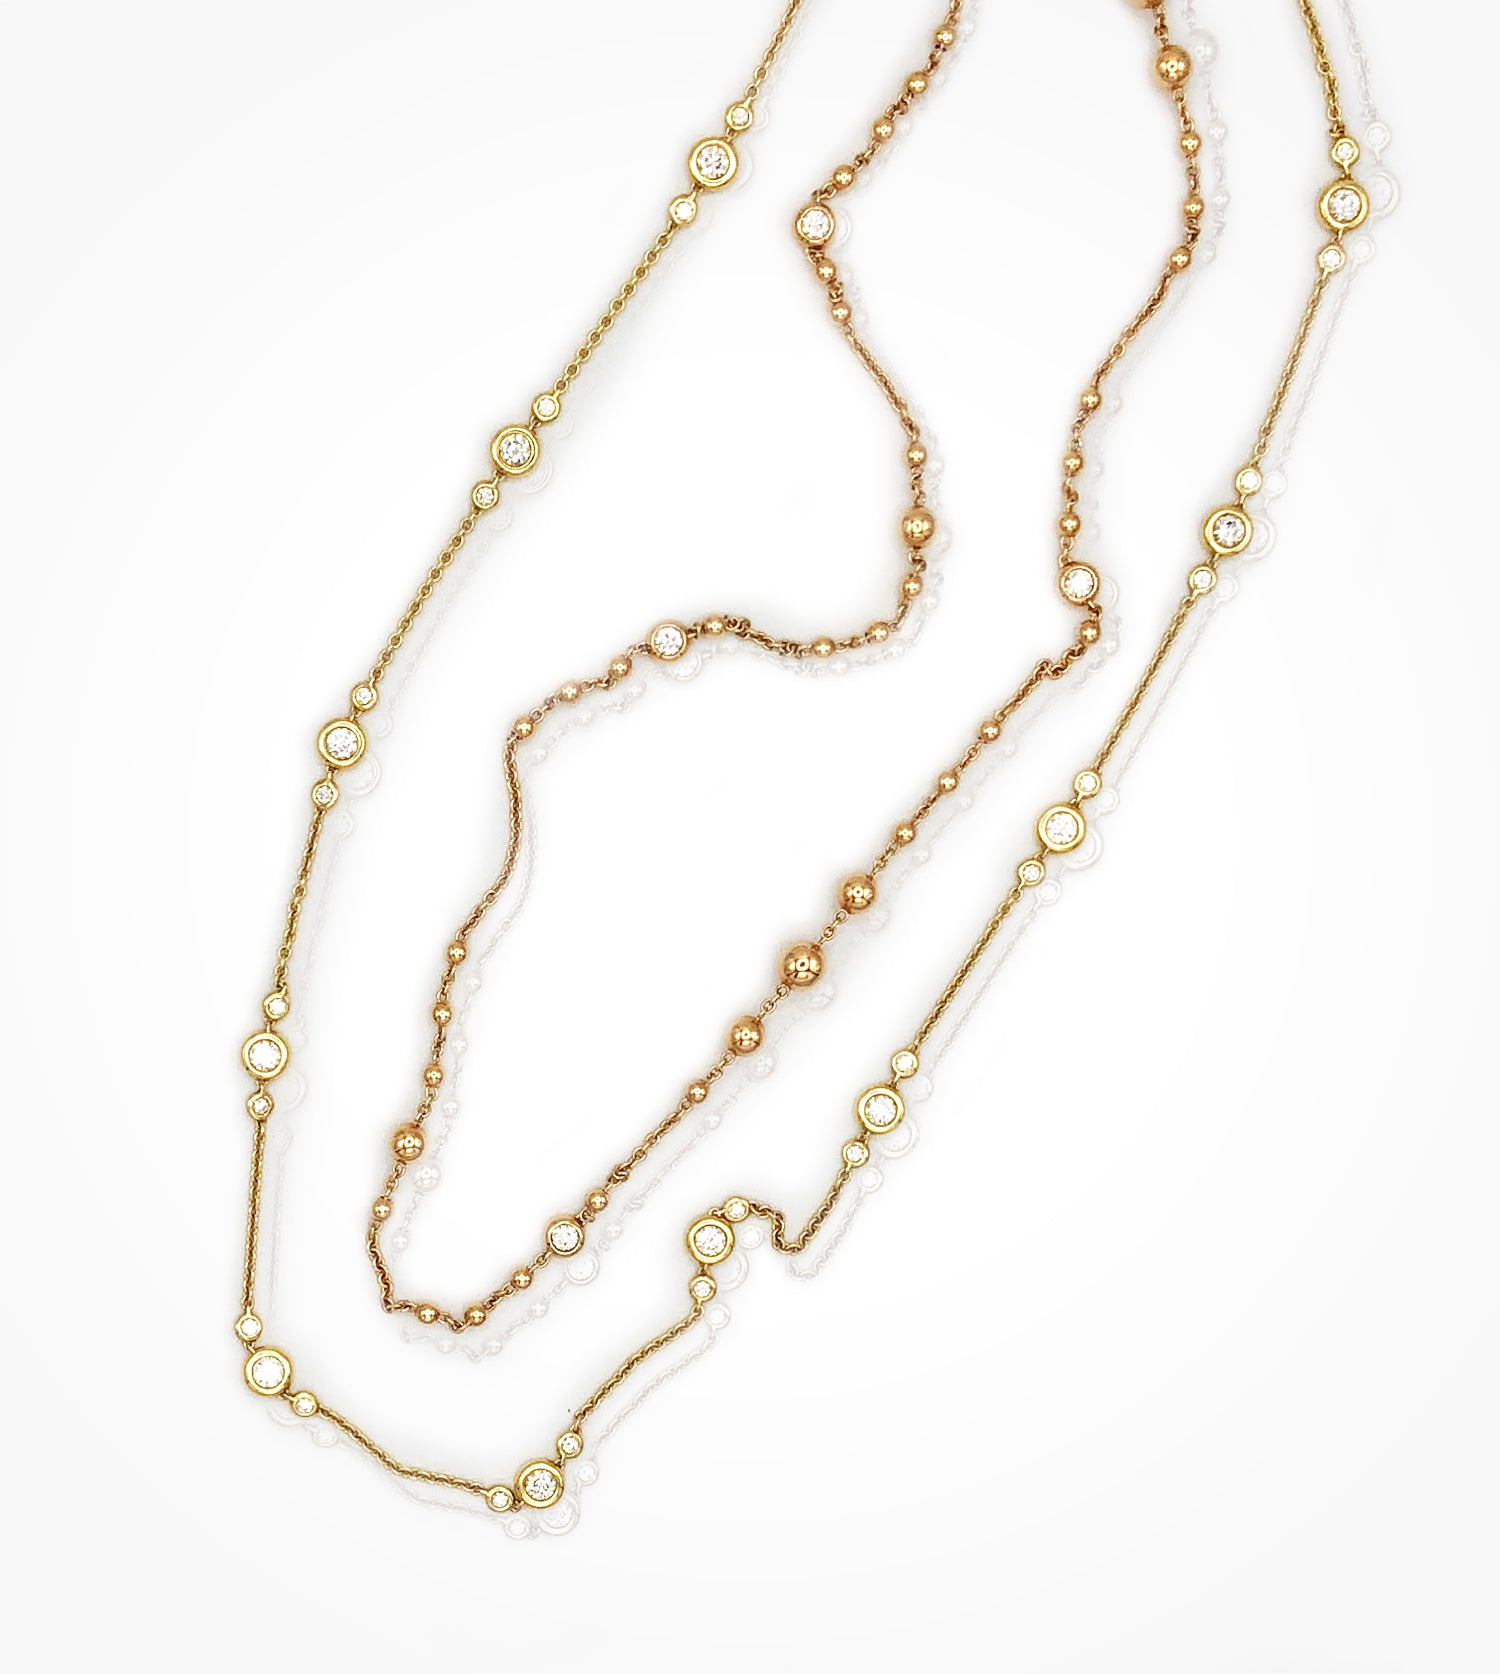 NE08268-18KY bezel set 66 diamond 36in-long station chain necklace. --NE08285-18KP spaced beads and diamond=0.80cts, 34in long necklace SOLD